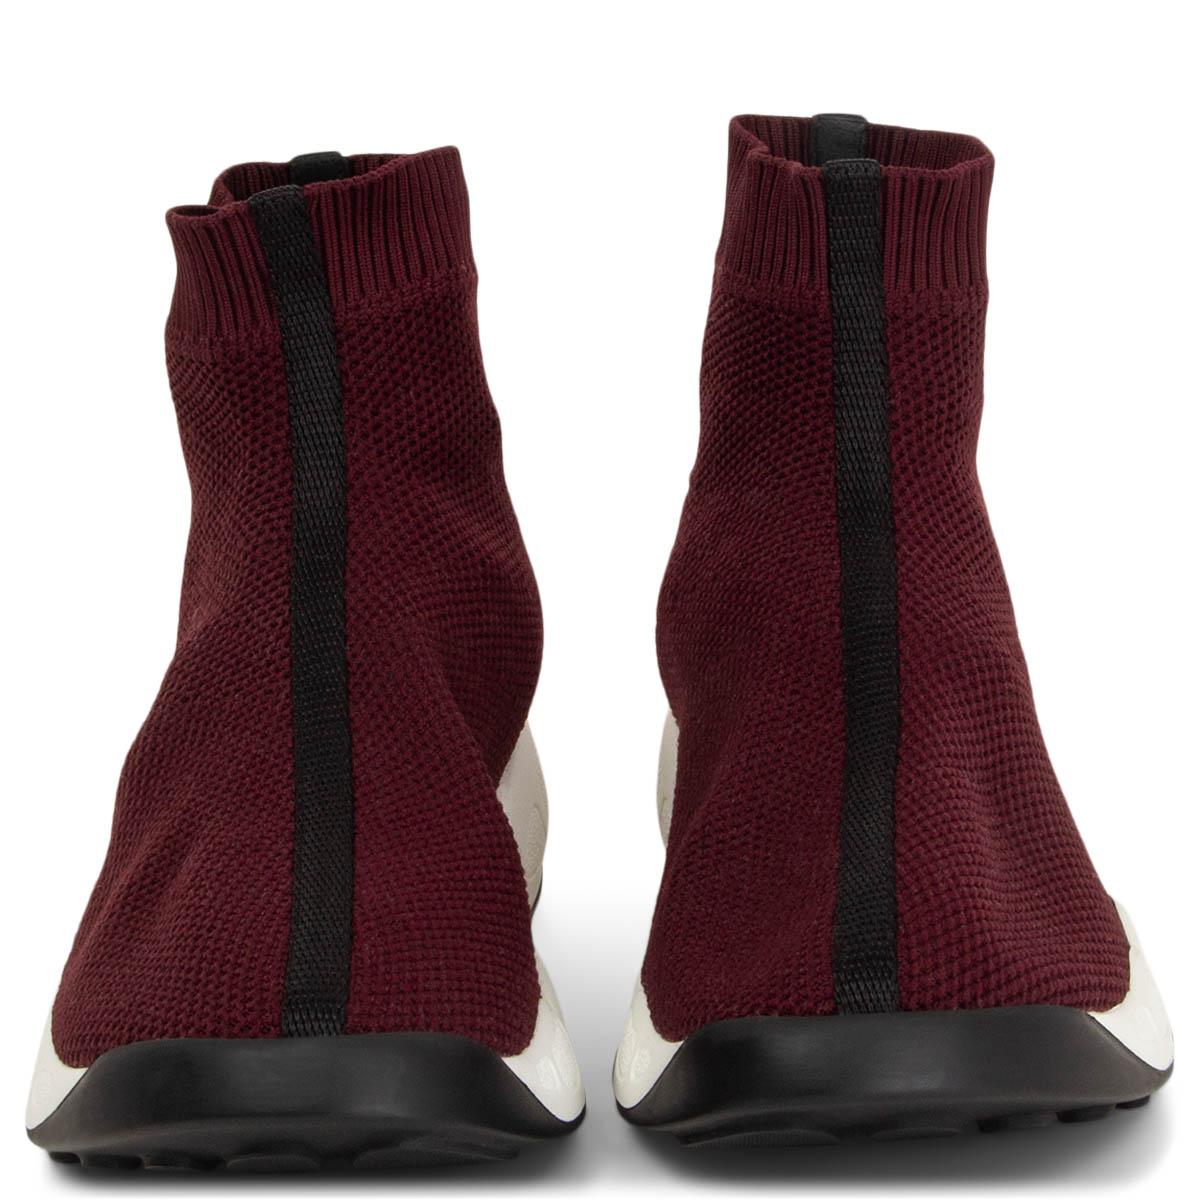 100% authentic Christian Dior Fusion Technical high top sneakers in burgundy mesh featuring a logo printed pull tab at rear and white rubber soles. Brand new. Comes with dust bags. 

Measurements
Imprinted Size	Missing Size 
Shoe Size	estimated